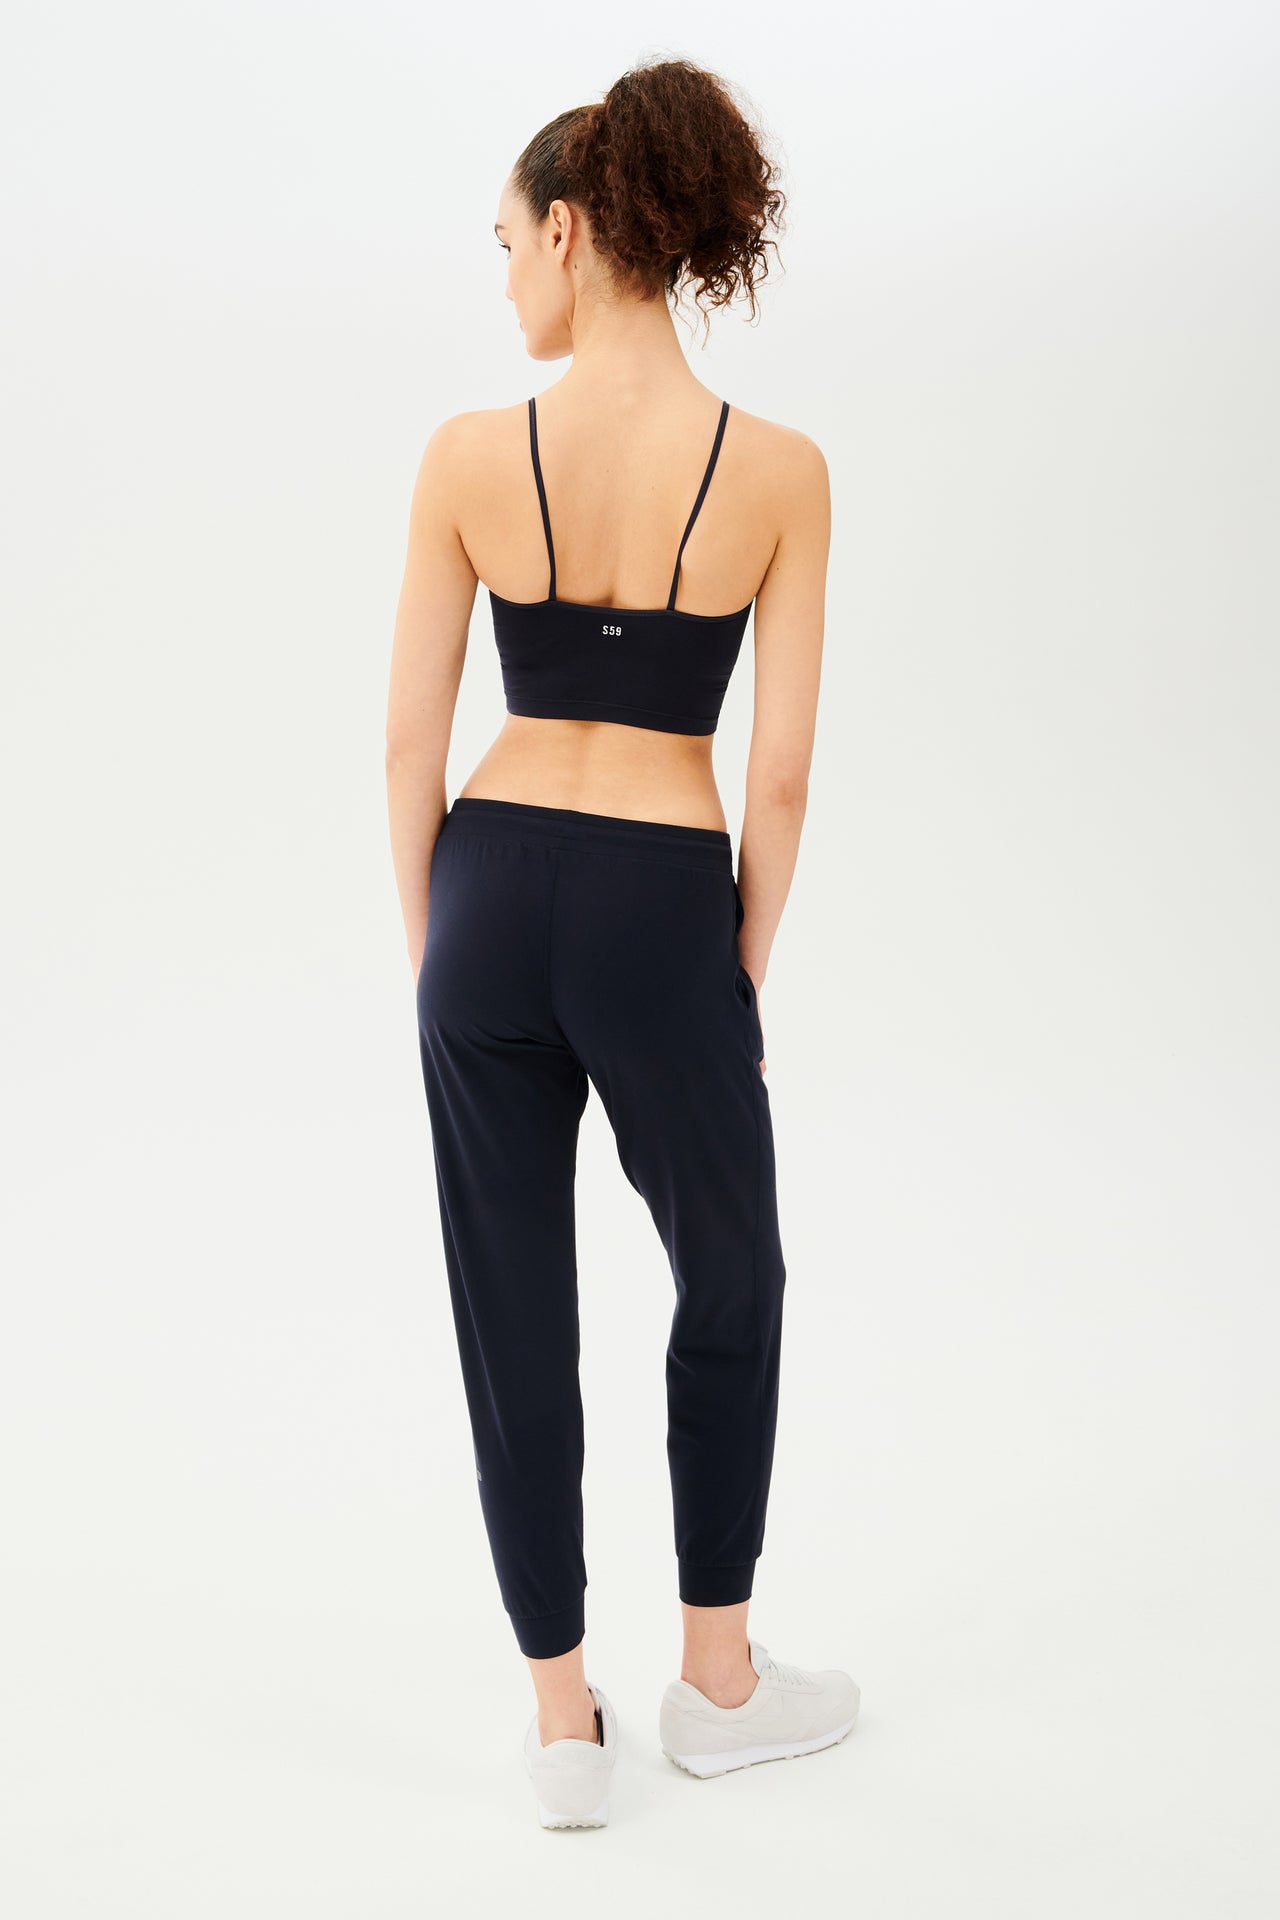 Full back view of girl wearing dark blue sweatpants with black tie around waistband and a dark blue sports bra with white shoes 